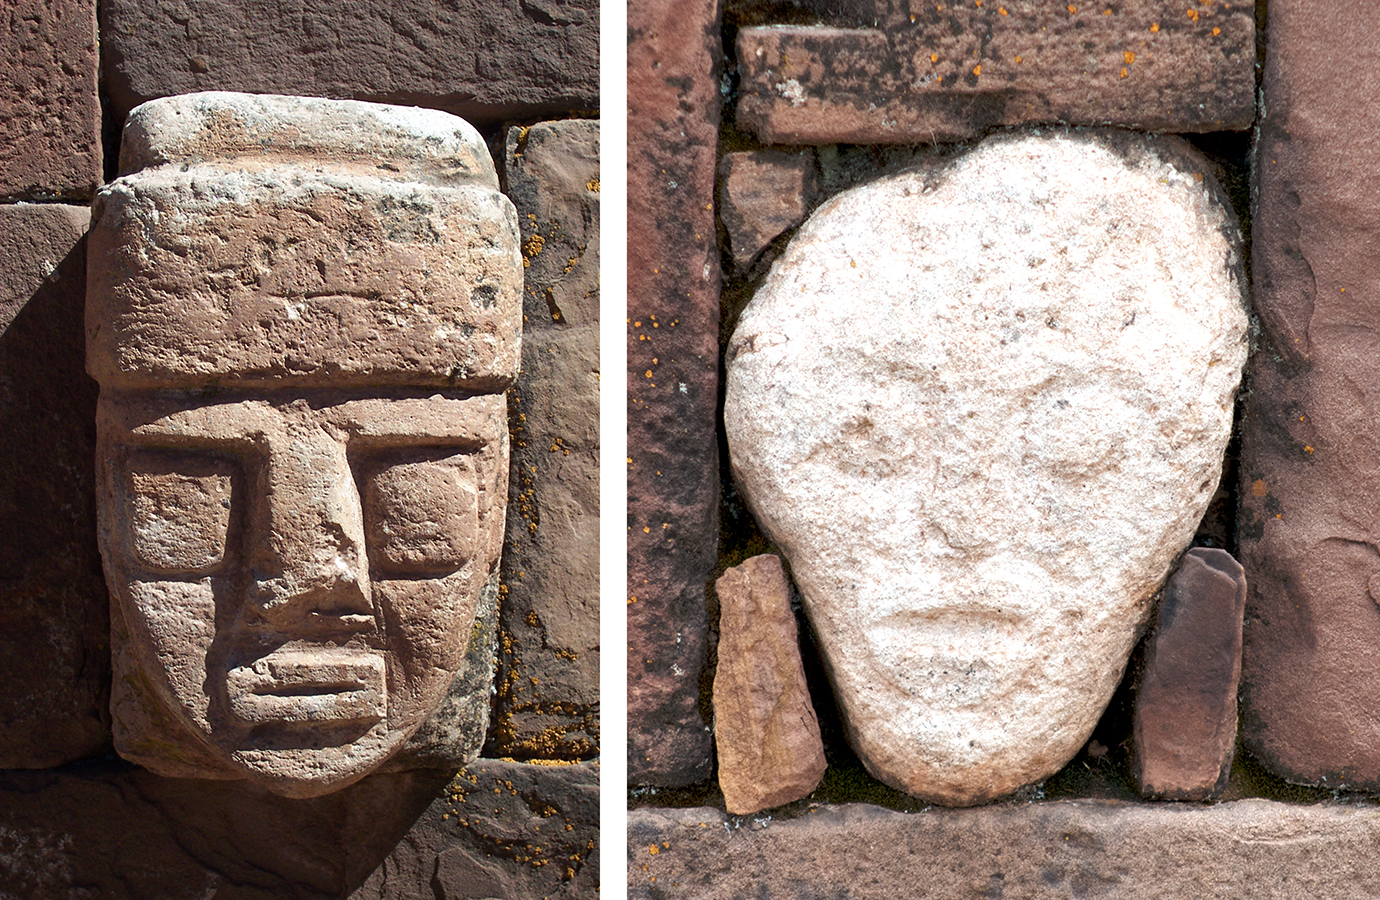 Left: Common style of tenon head, Semi-subterranean Court, Tiwanaku, Bolivia (photo: THEOW, CC BY-NC-ND 2.0); Right: Less common style of tenon head, Semi-subterranean Court, Tiwanaku, Bolivia (photo: Kevin Jones, CC BY 2.0)